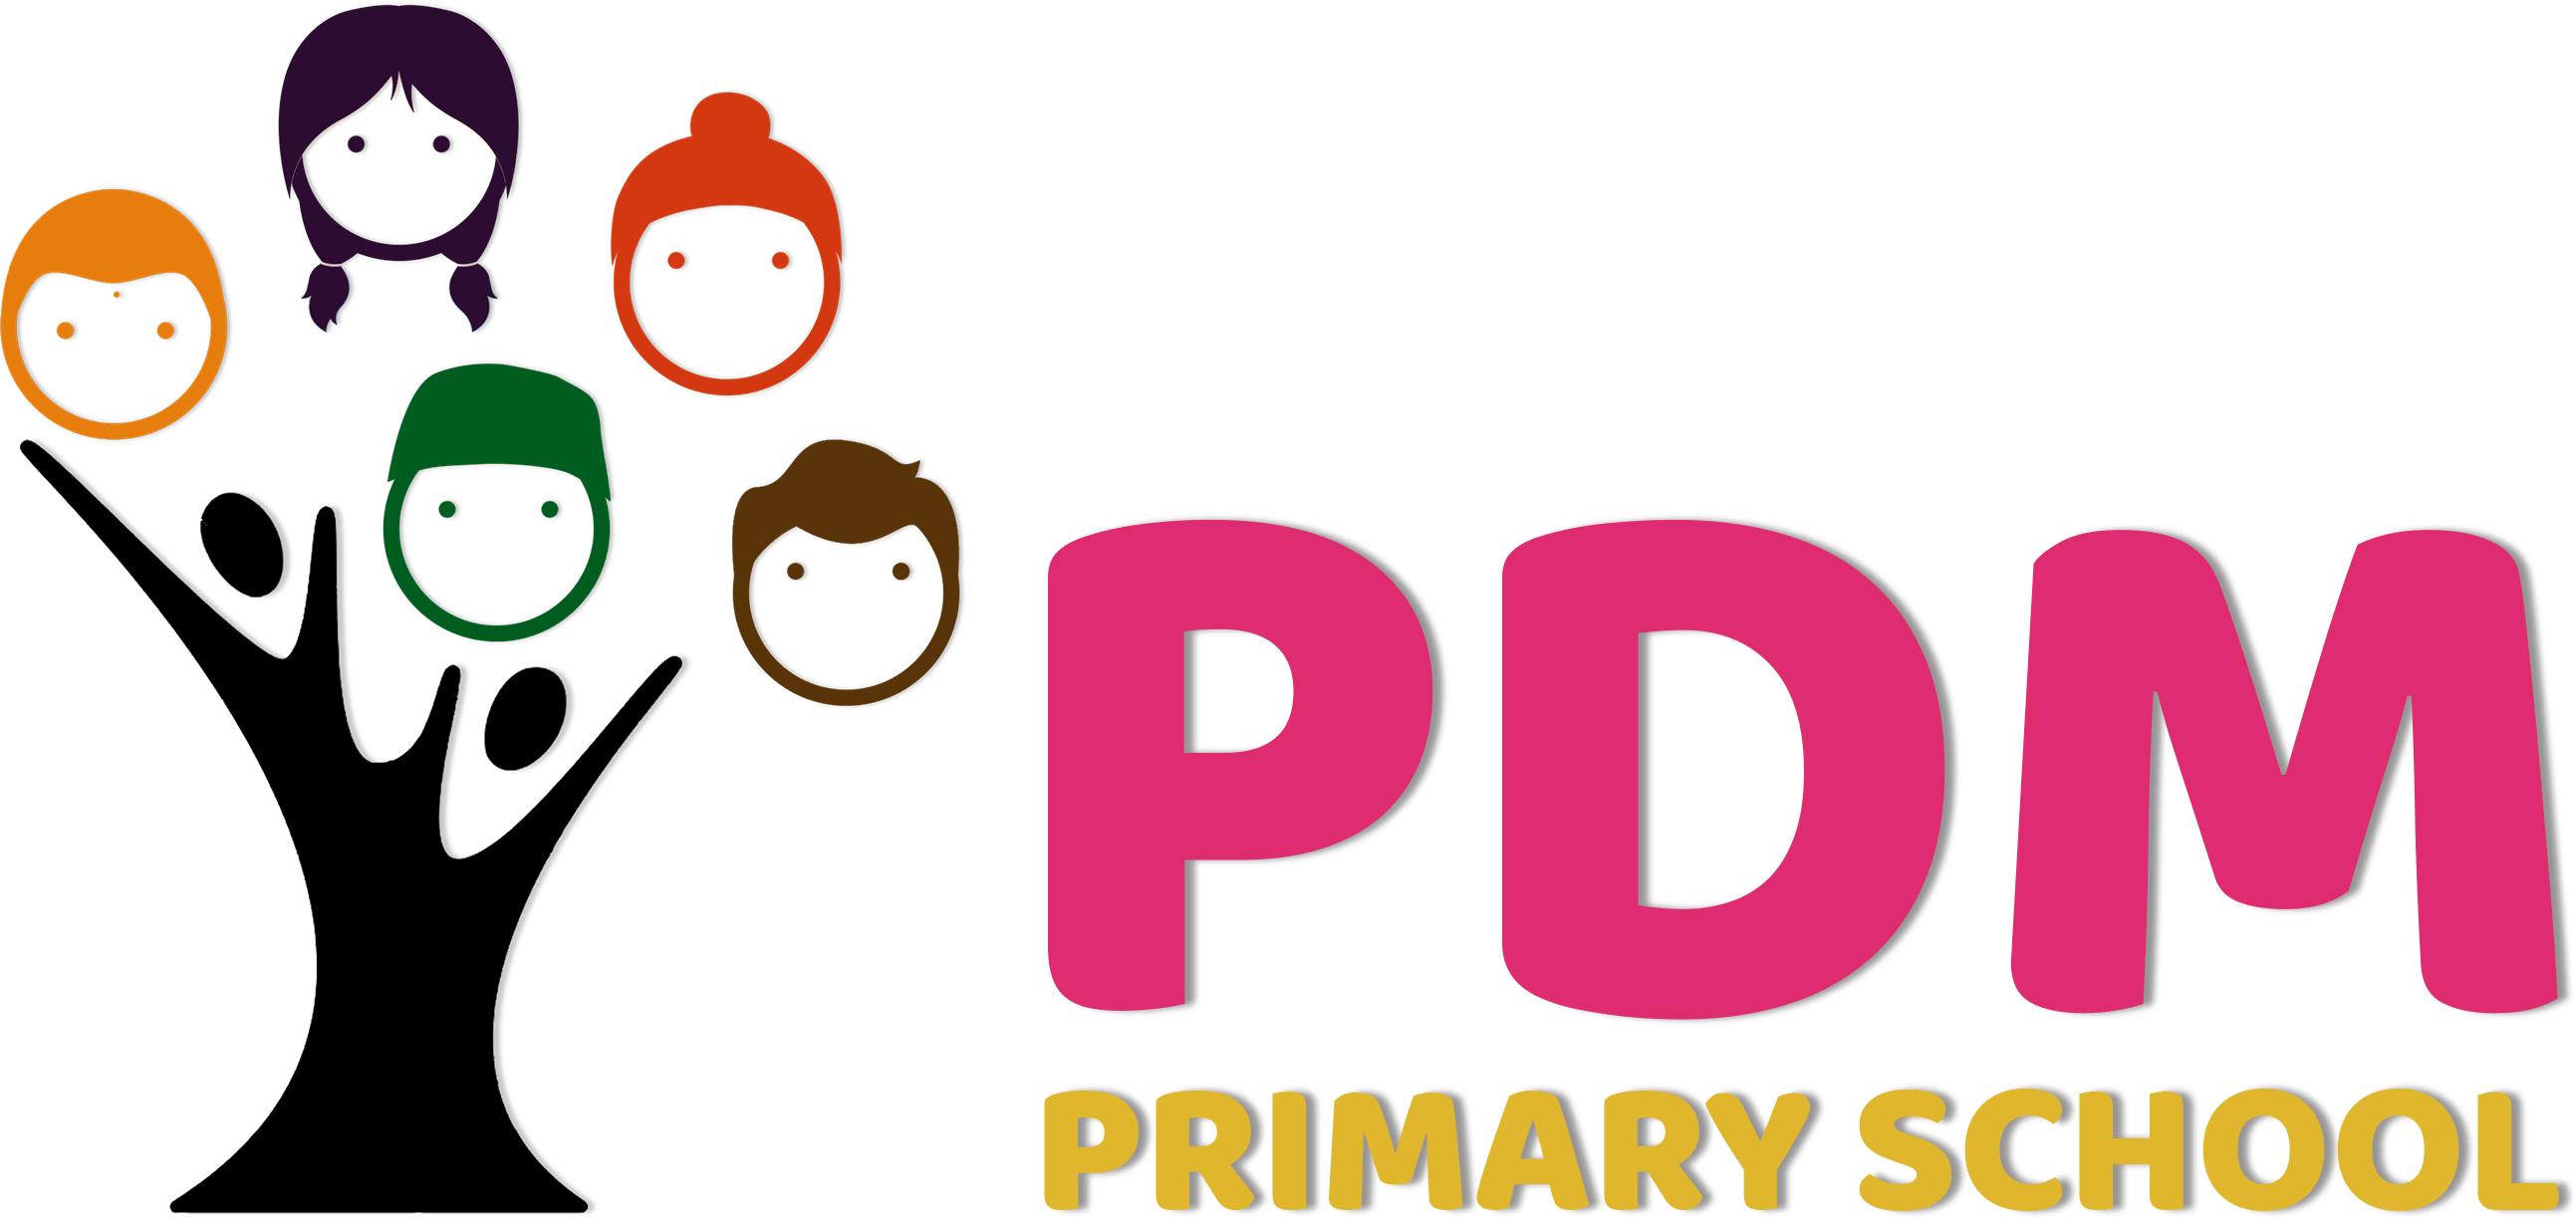 PDM PRIMARY SCHOOL|Colleges|Education